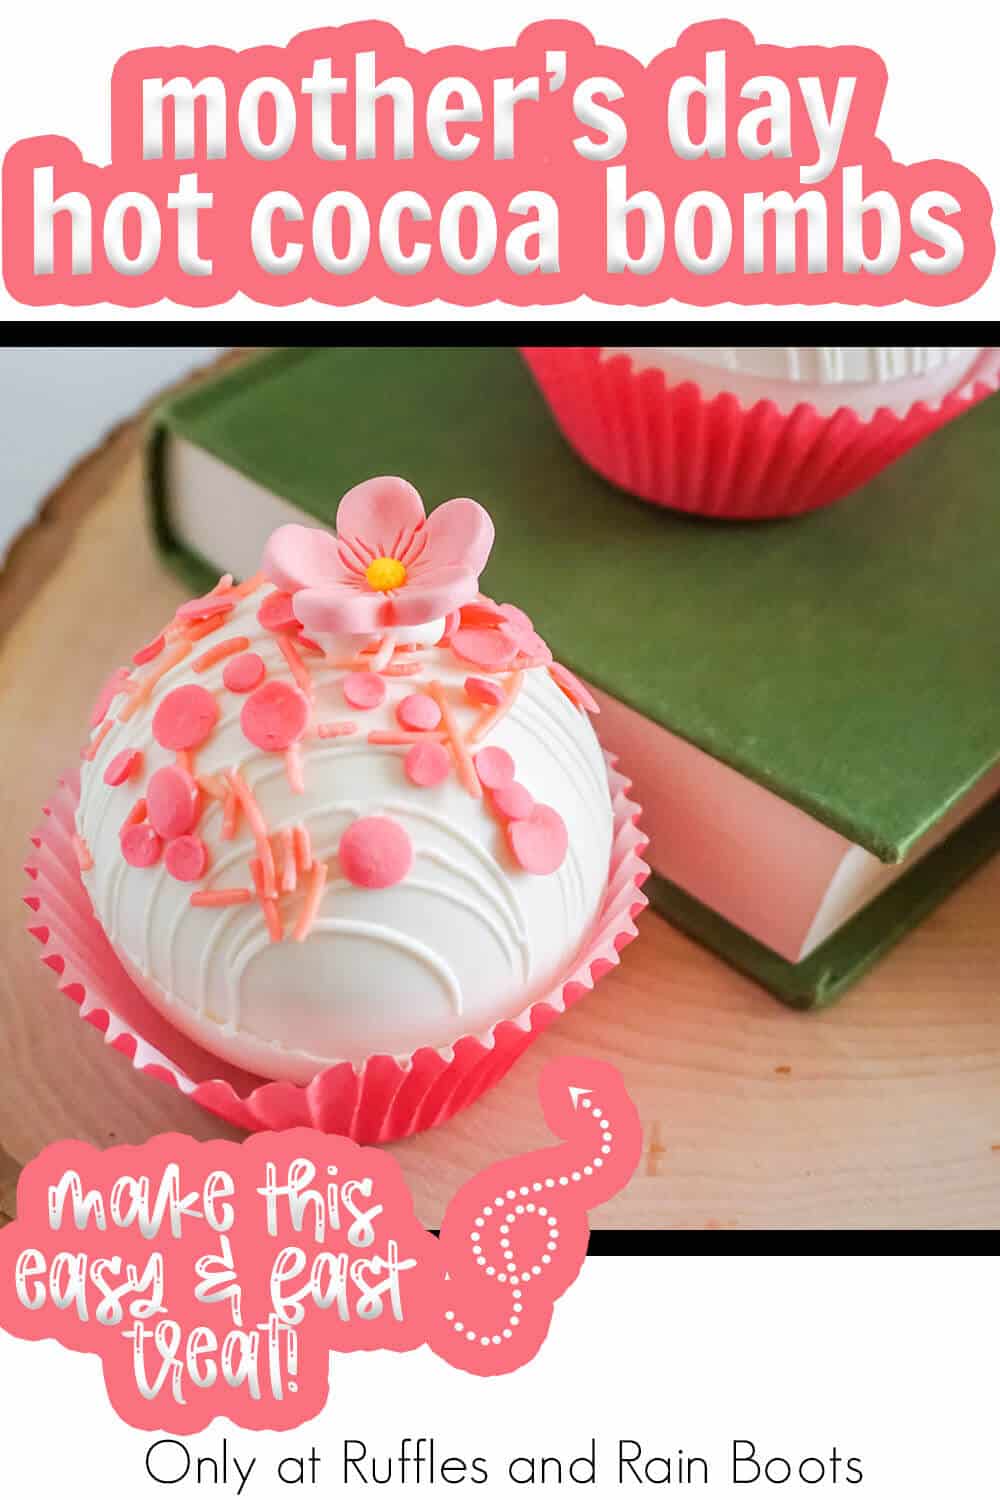 spring birthday hot cocoa bomb recipe with text which reads mother's day hot cocoa bombs make these easy & fast treats!